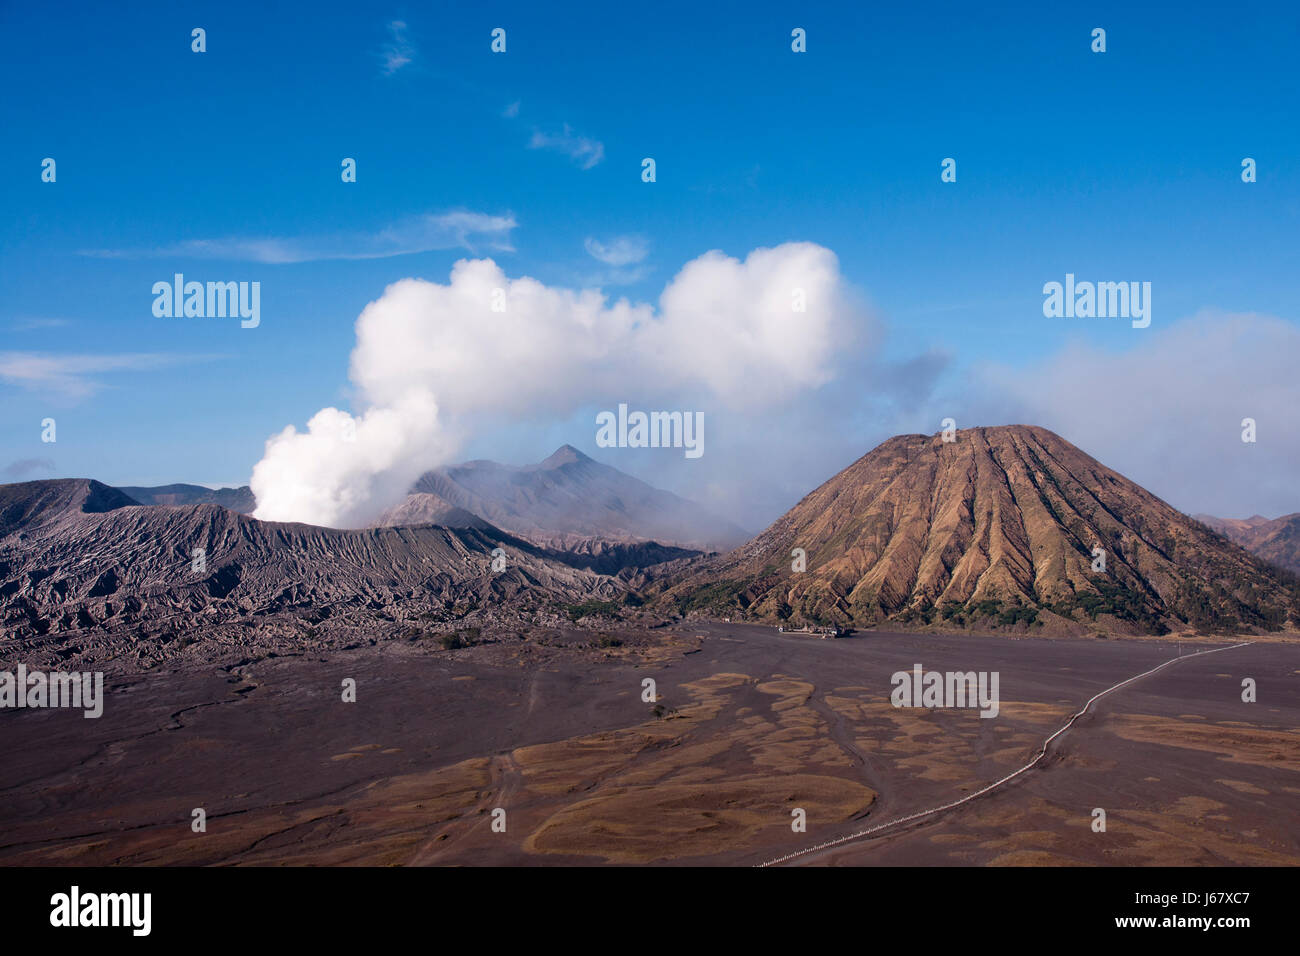 Mount Bromo, an active volcano with clear blue sky at the Tengger Semeru National Park in East Java, Indonesia. Stock Photo